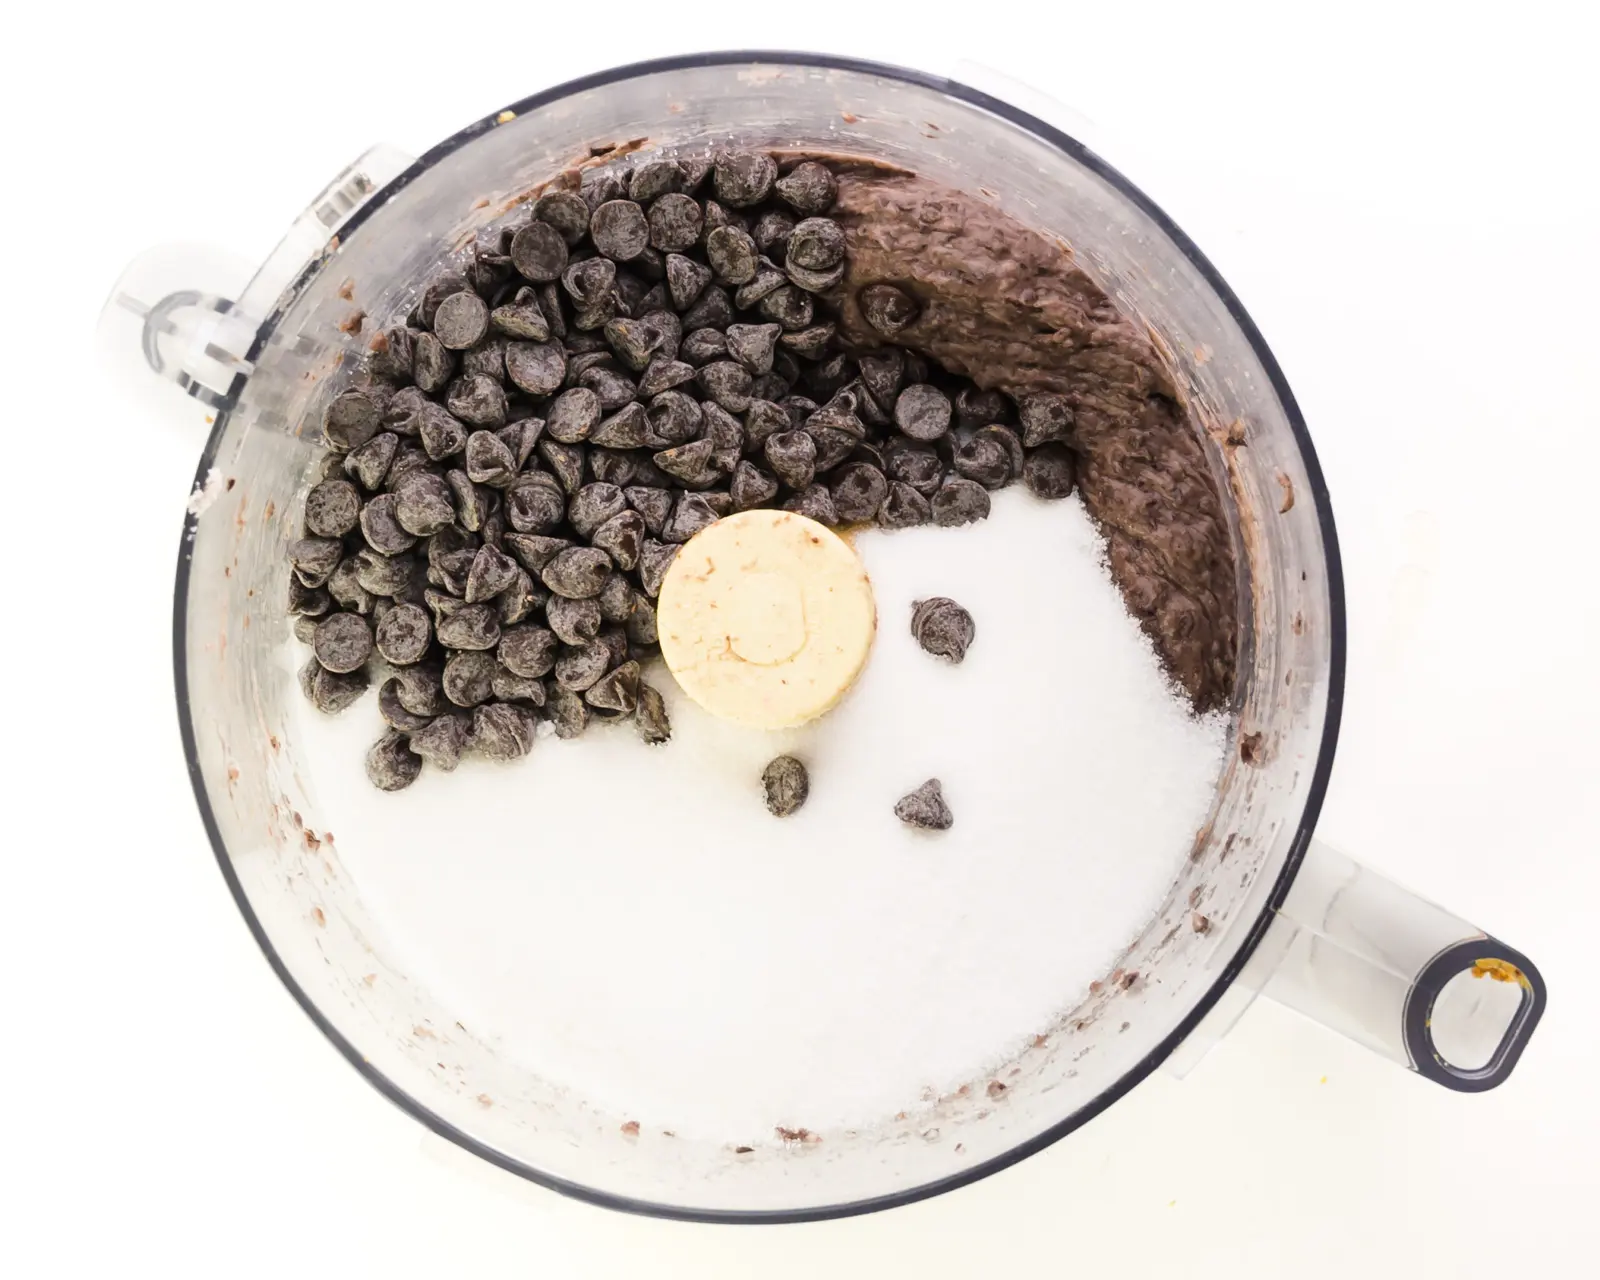 Blended black beans, chocolate chips, and sugar is in the bottom of food processor bowl.